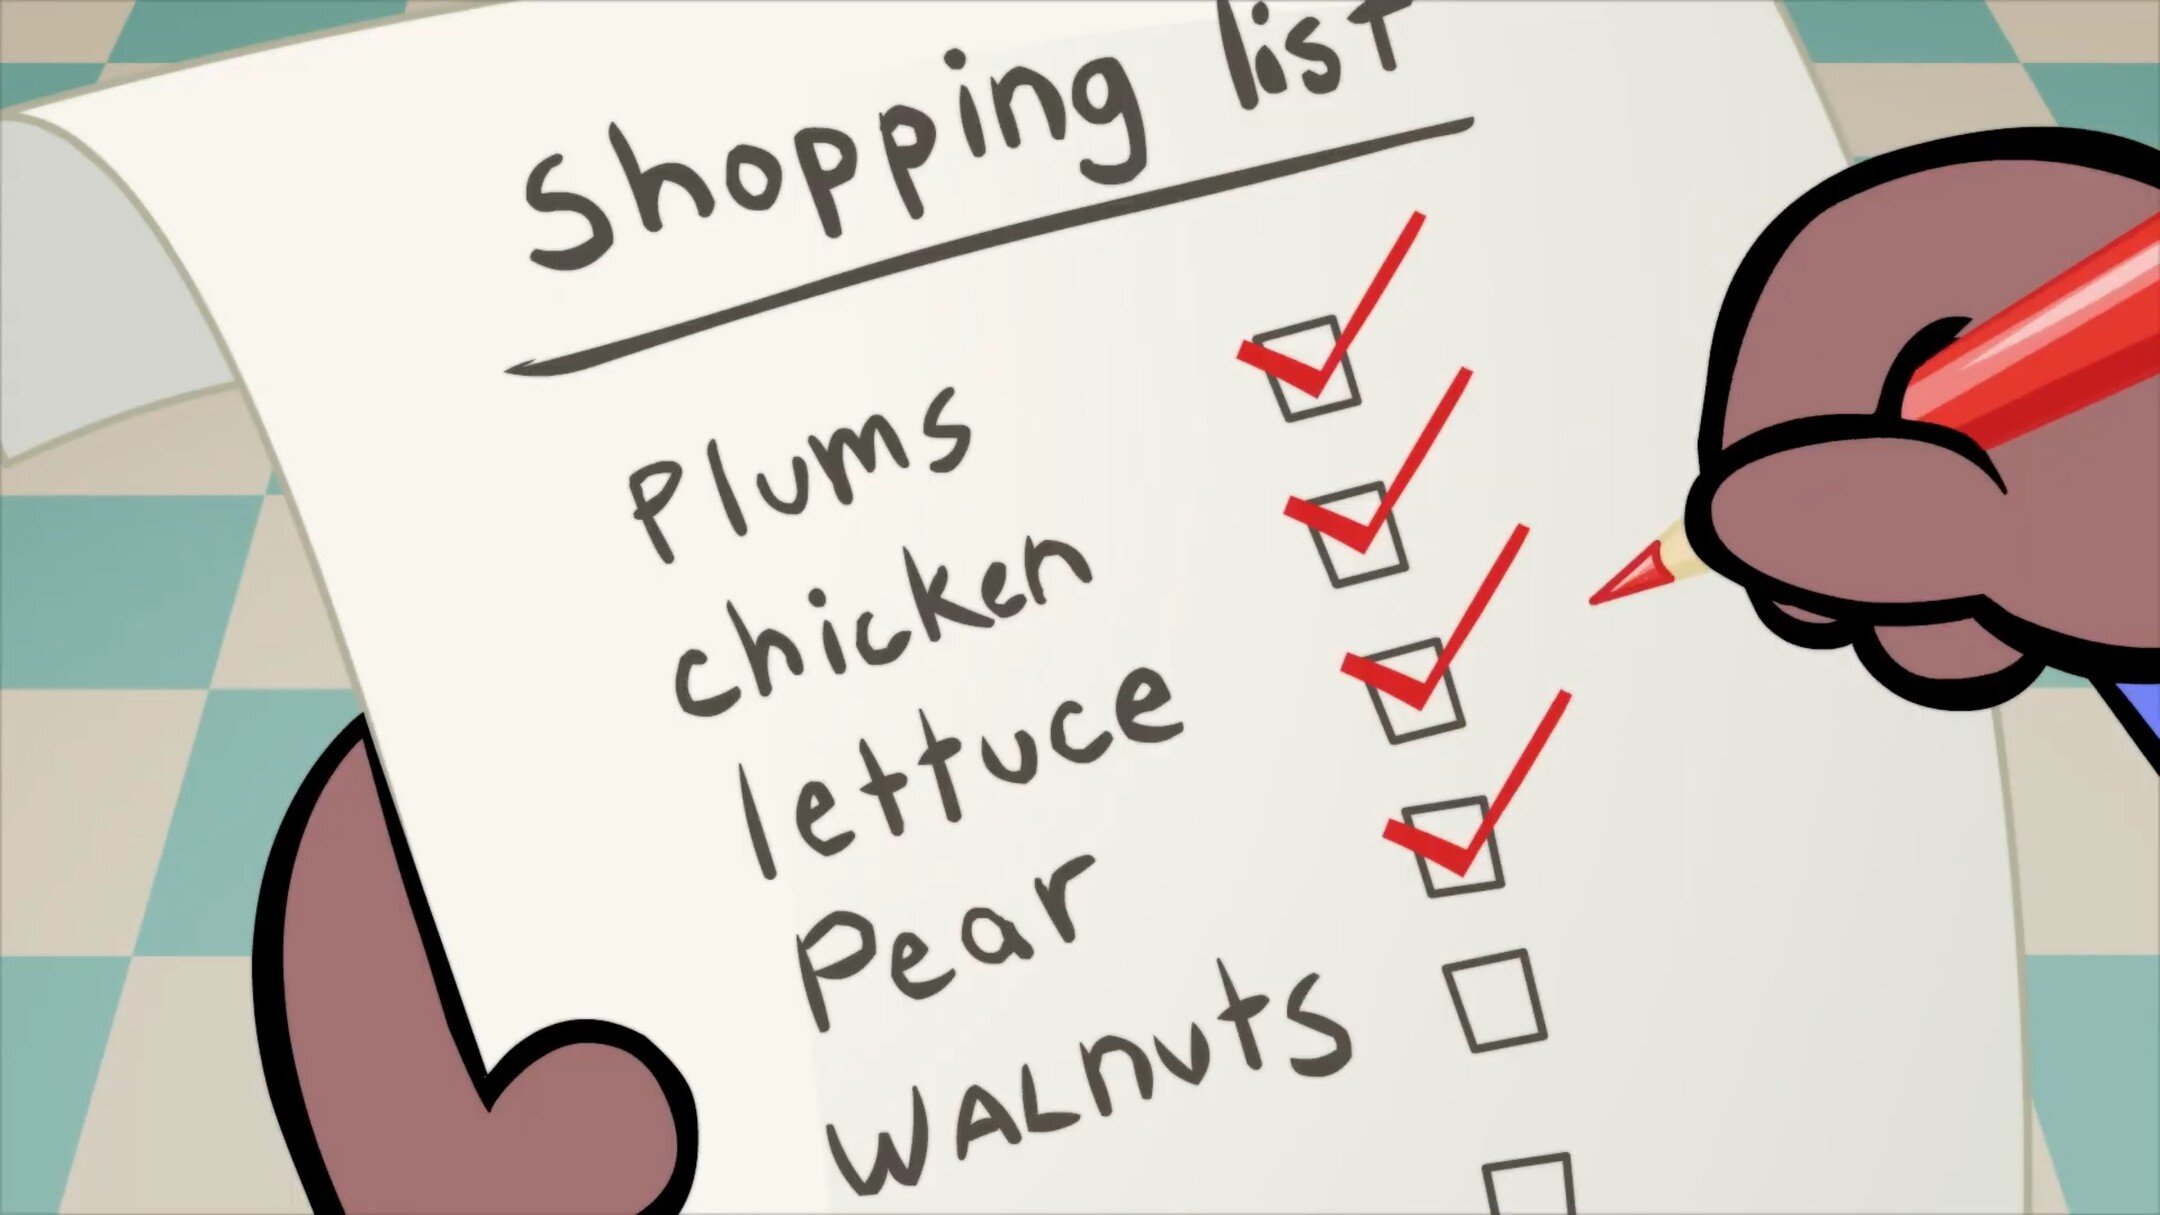 It's another #fizzyfriday featuring one of our most popular episodes: SHOPPING THE U 🛒 now streaming on the official Lunch Lab YouTube channel!

#food #kidscooking #funny #groceryshopping #nutrition #kidstv #nowstreaming